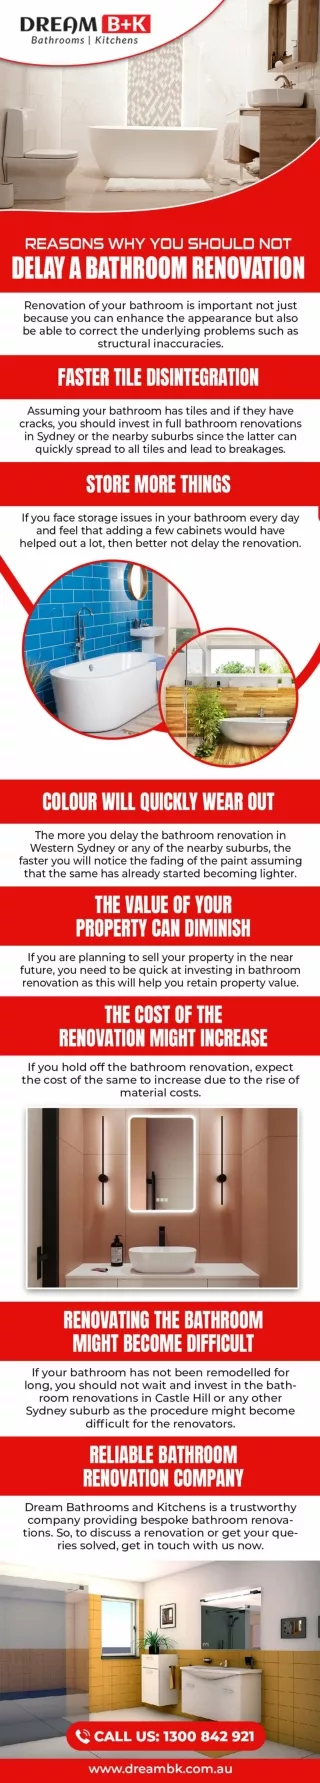 REASONS WHY YOU SHOULD NOT DELAY A BATHROOM RENOVATION